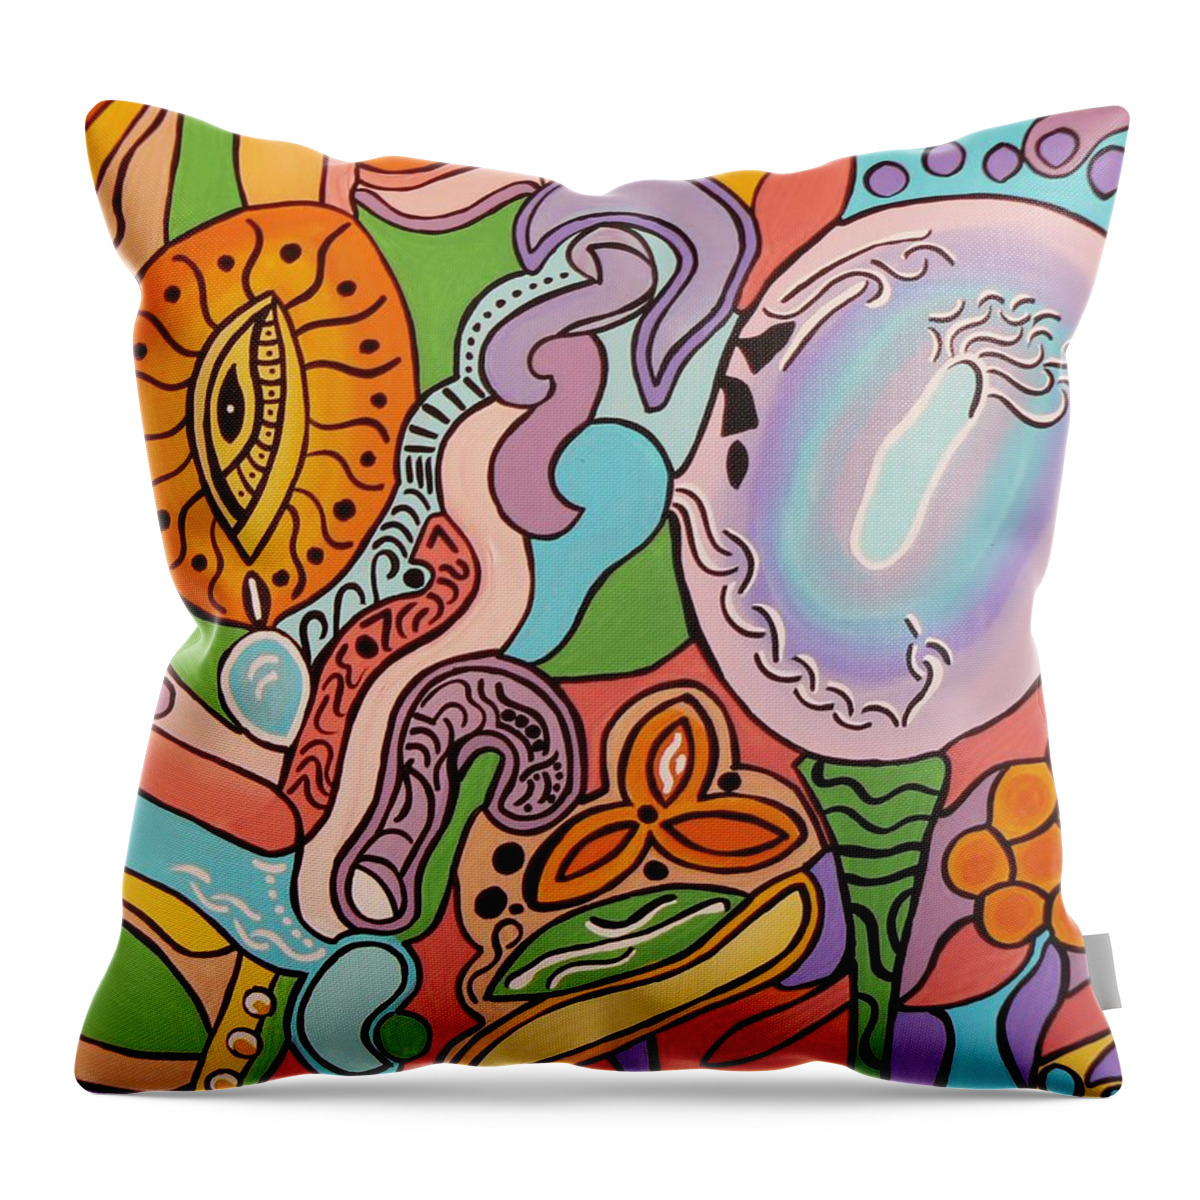 Egg Salad Throw Pillow featuring the painting All Seeing Egg Salad by Barbara St Jean